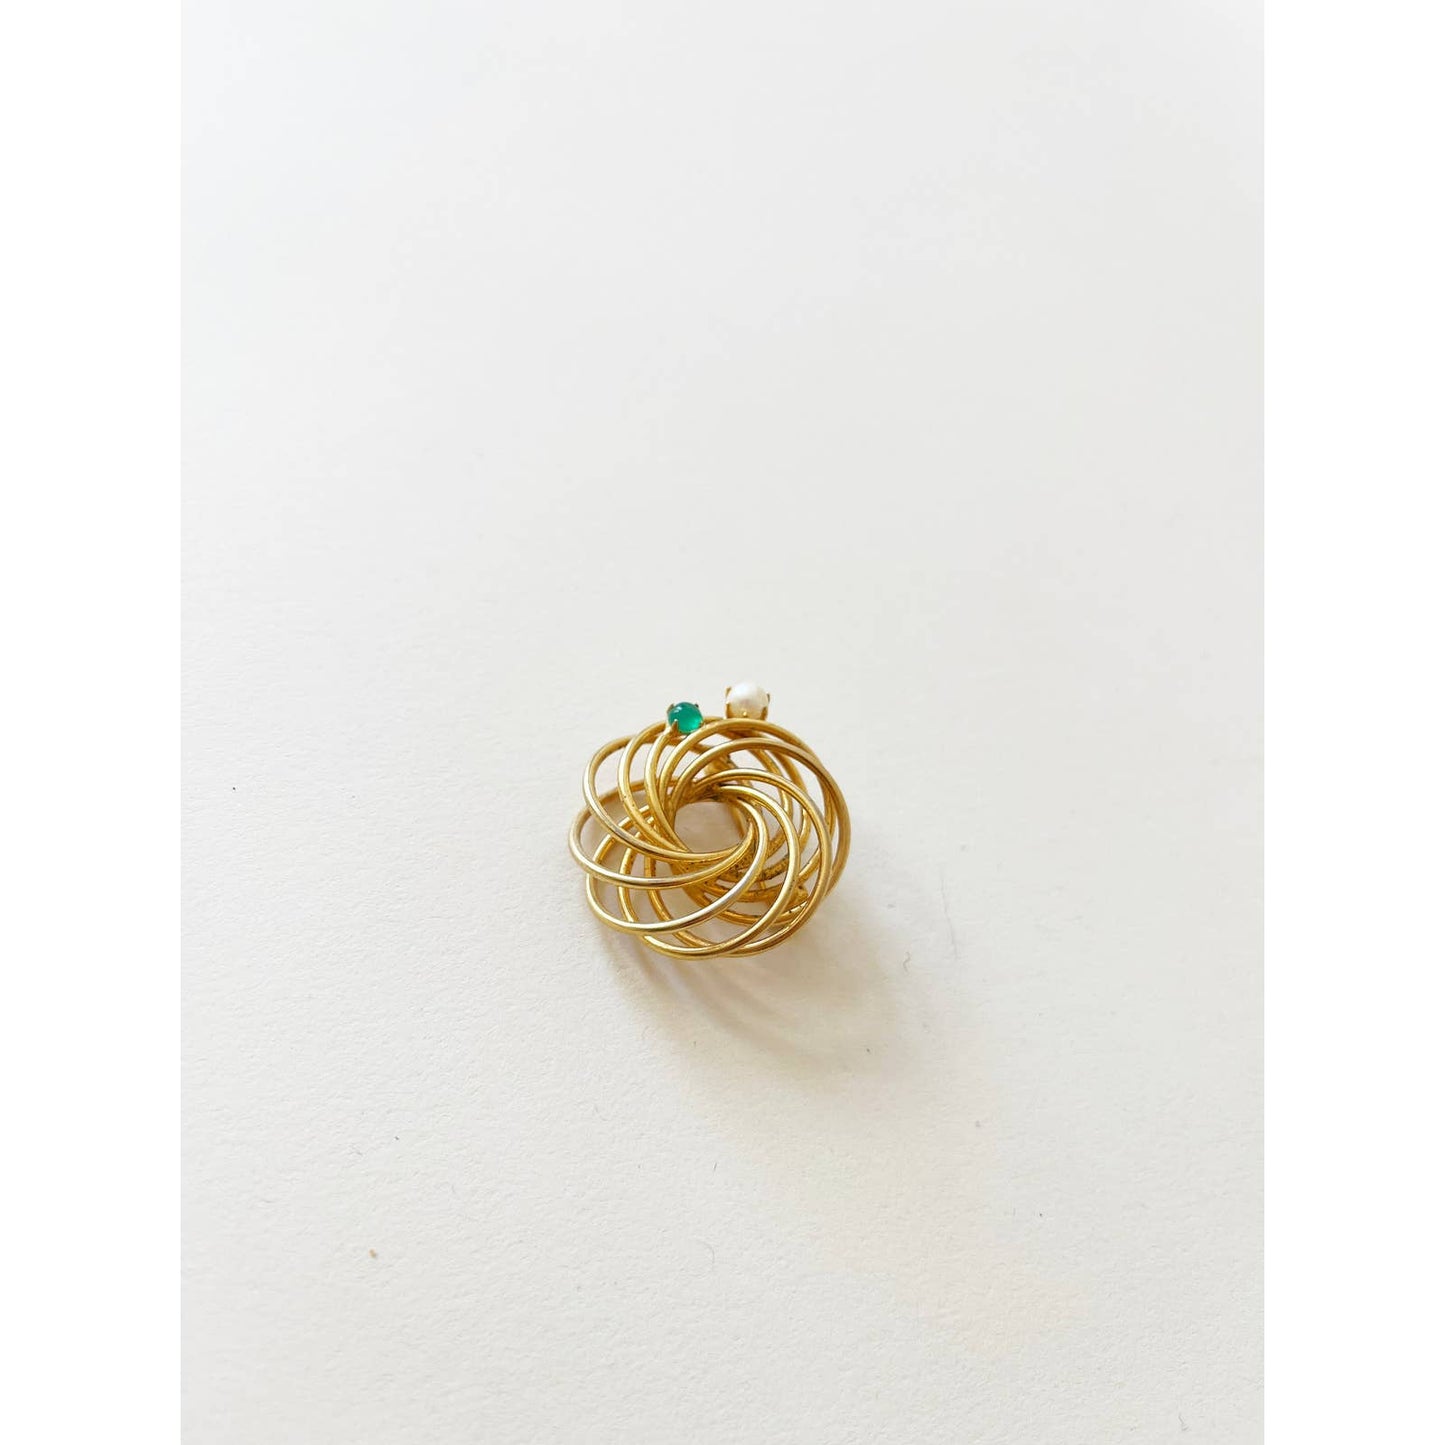 Vintage Gold Swirl Brooch with Pearl and Green Stone